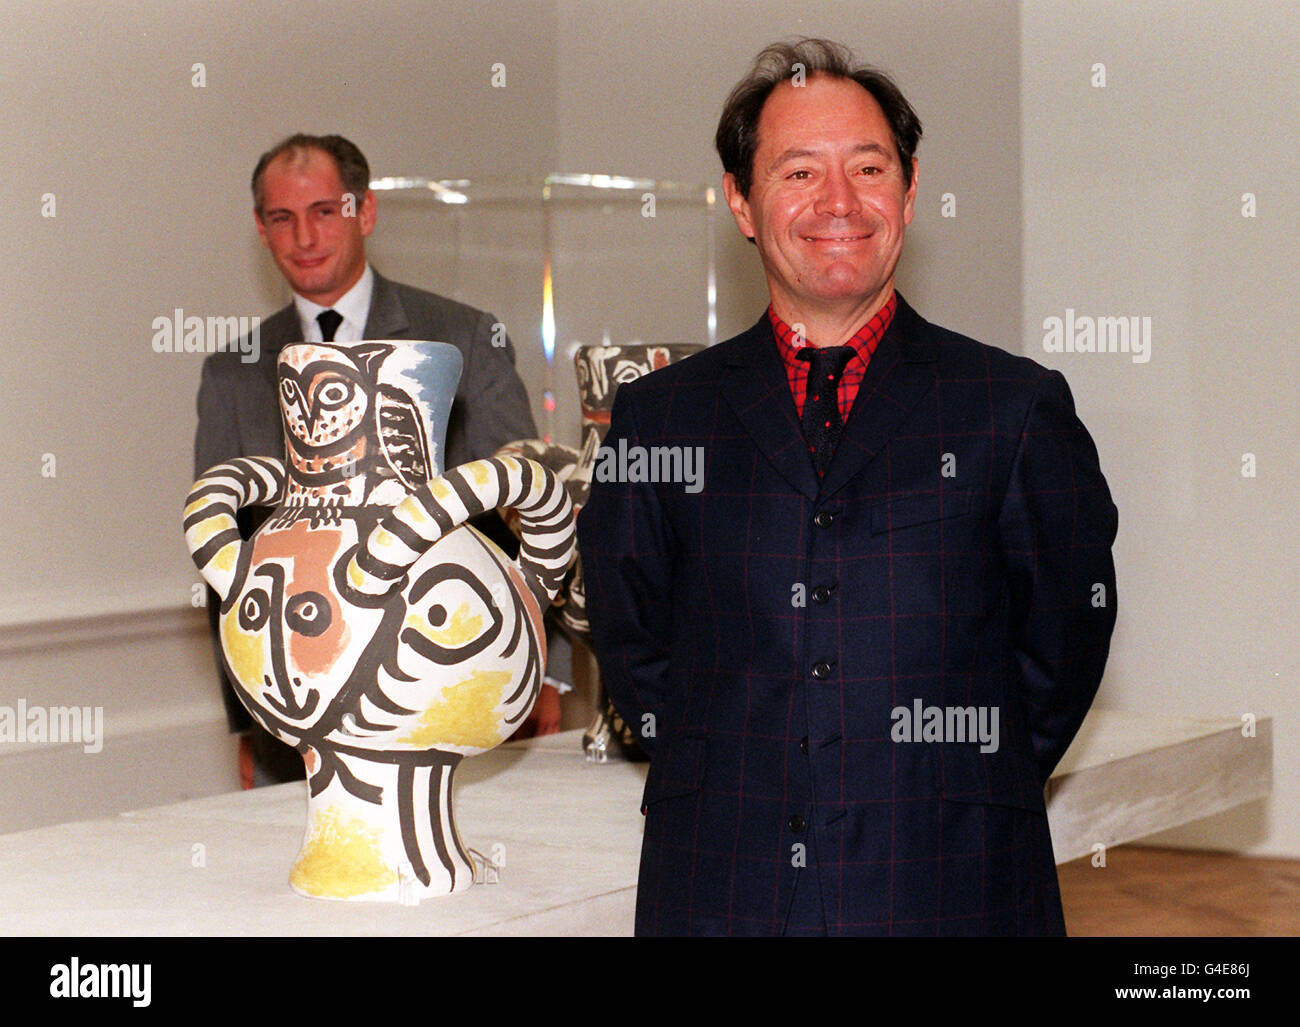 Claude Picasso (right) and Bernard Ruiz Picasso, son and grandson of Pablo Picasso oversea the installation of Picasso ceramics at the Royal Academy in London today (Monday) ahead of the show's opening on September 17. The exhibition sponsored by Goldman Sachs includes 174 unique pieces many of which have not been seen before. The ceramics shown are Owl and head of a faun, 3 February 1961 (front ) and Owl and head of a faun 9 March 1961. Photo by Rebecca Naden /PA Stock Photo